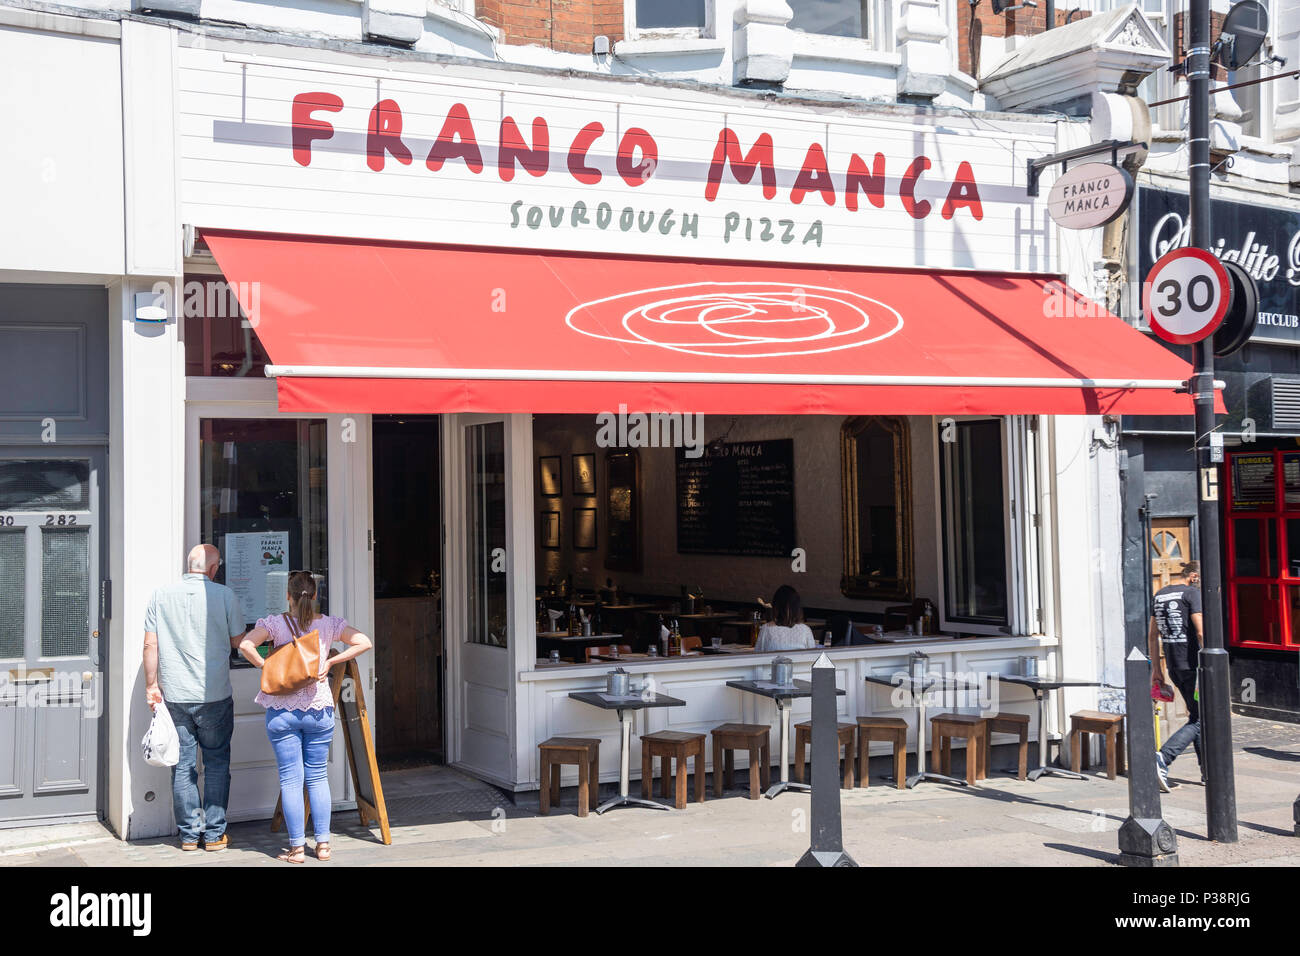 Franco Manca Pizza Restaurant, Muswell Hill Broadway, Muswell Hill, London Borough of Haringey, Greater London, England, United Kingdom Stock Photo